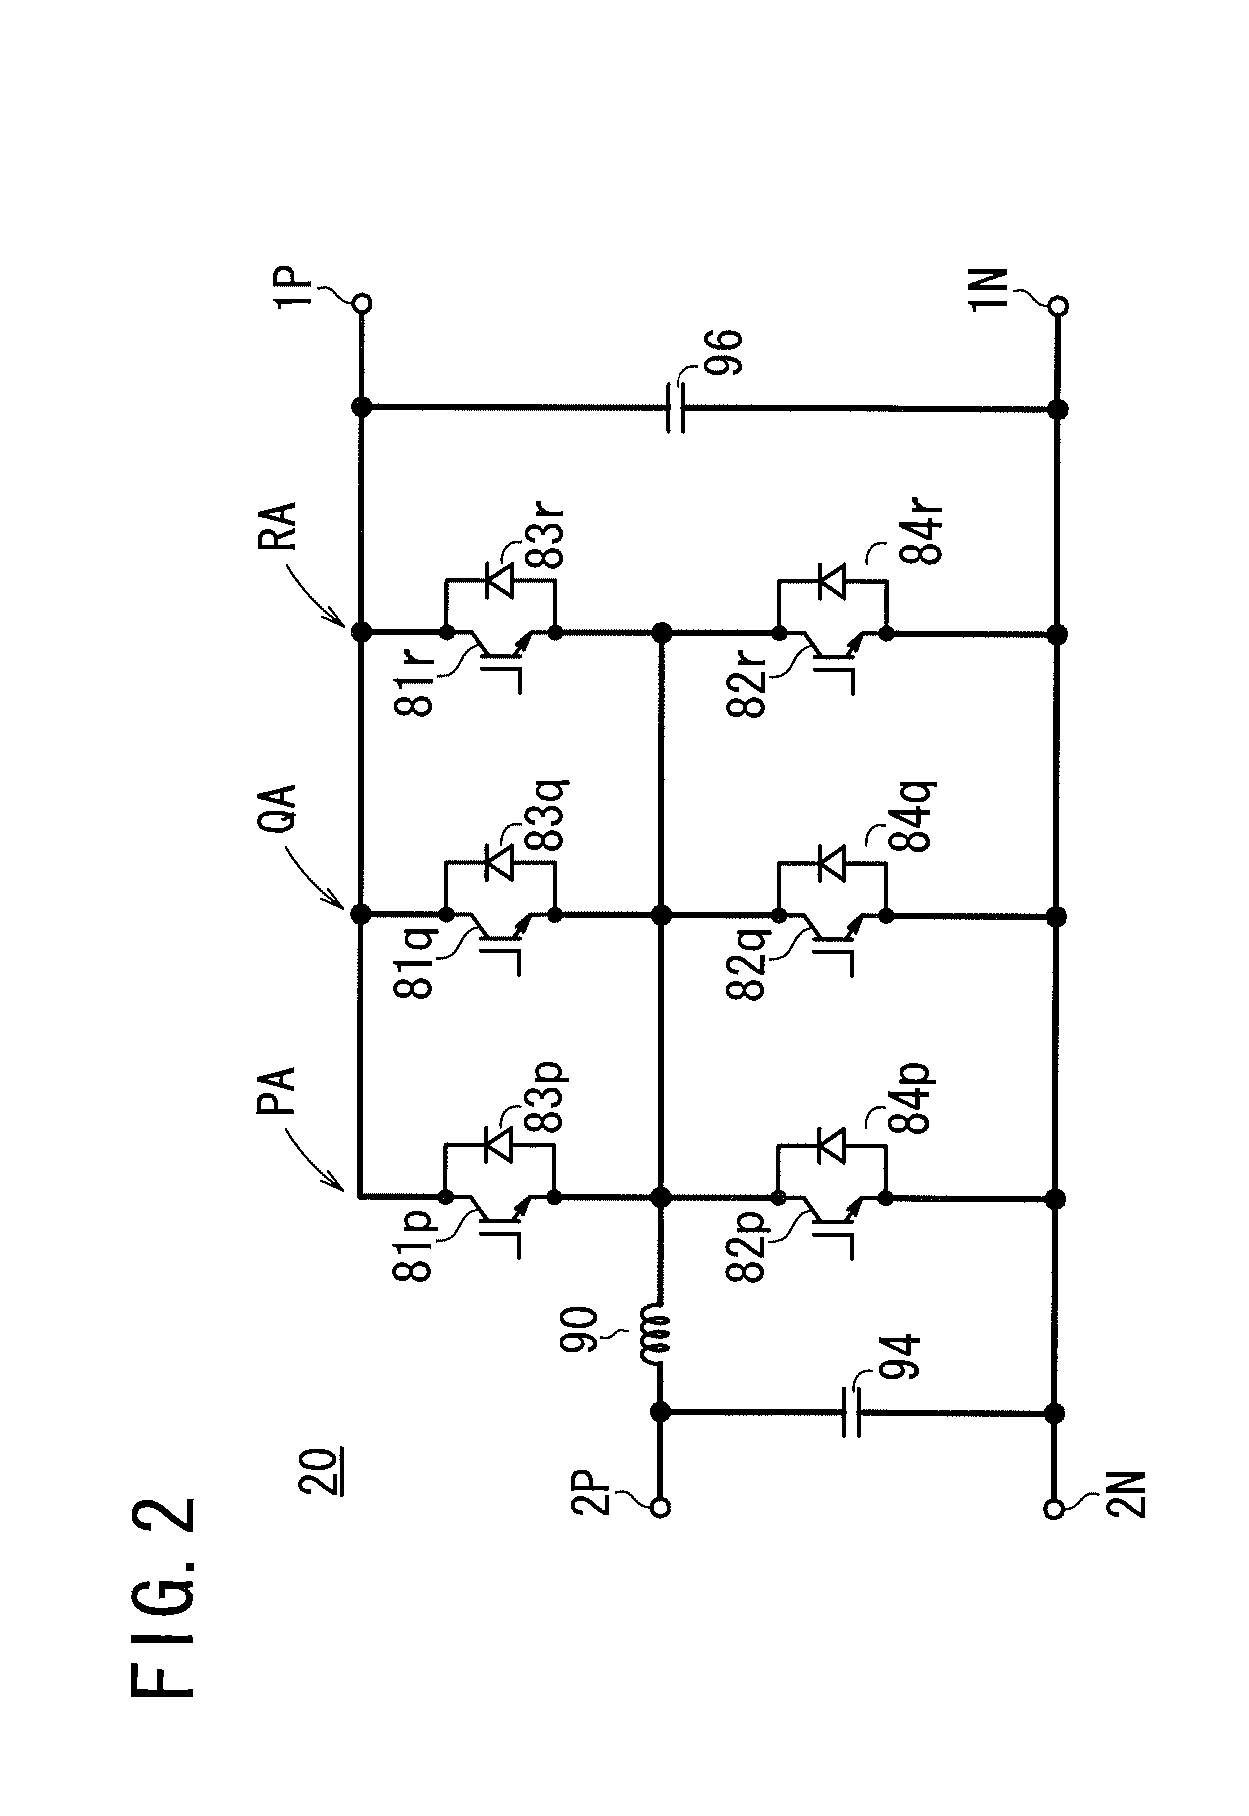 Electric vehicle with ground fault detecting system